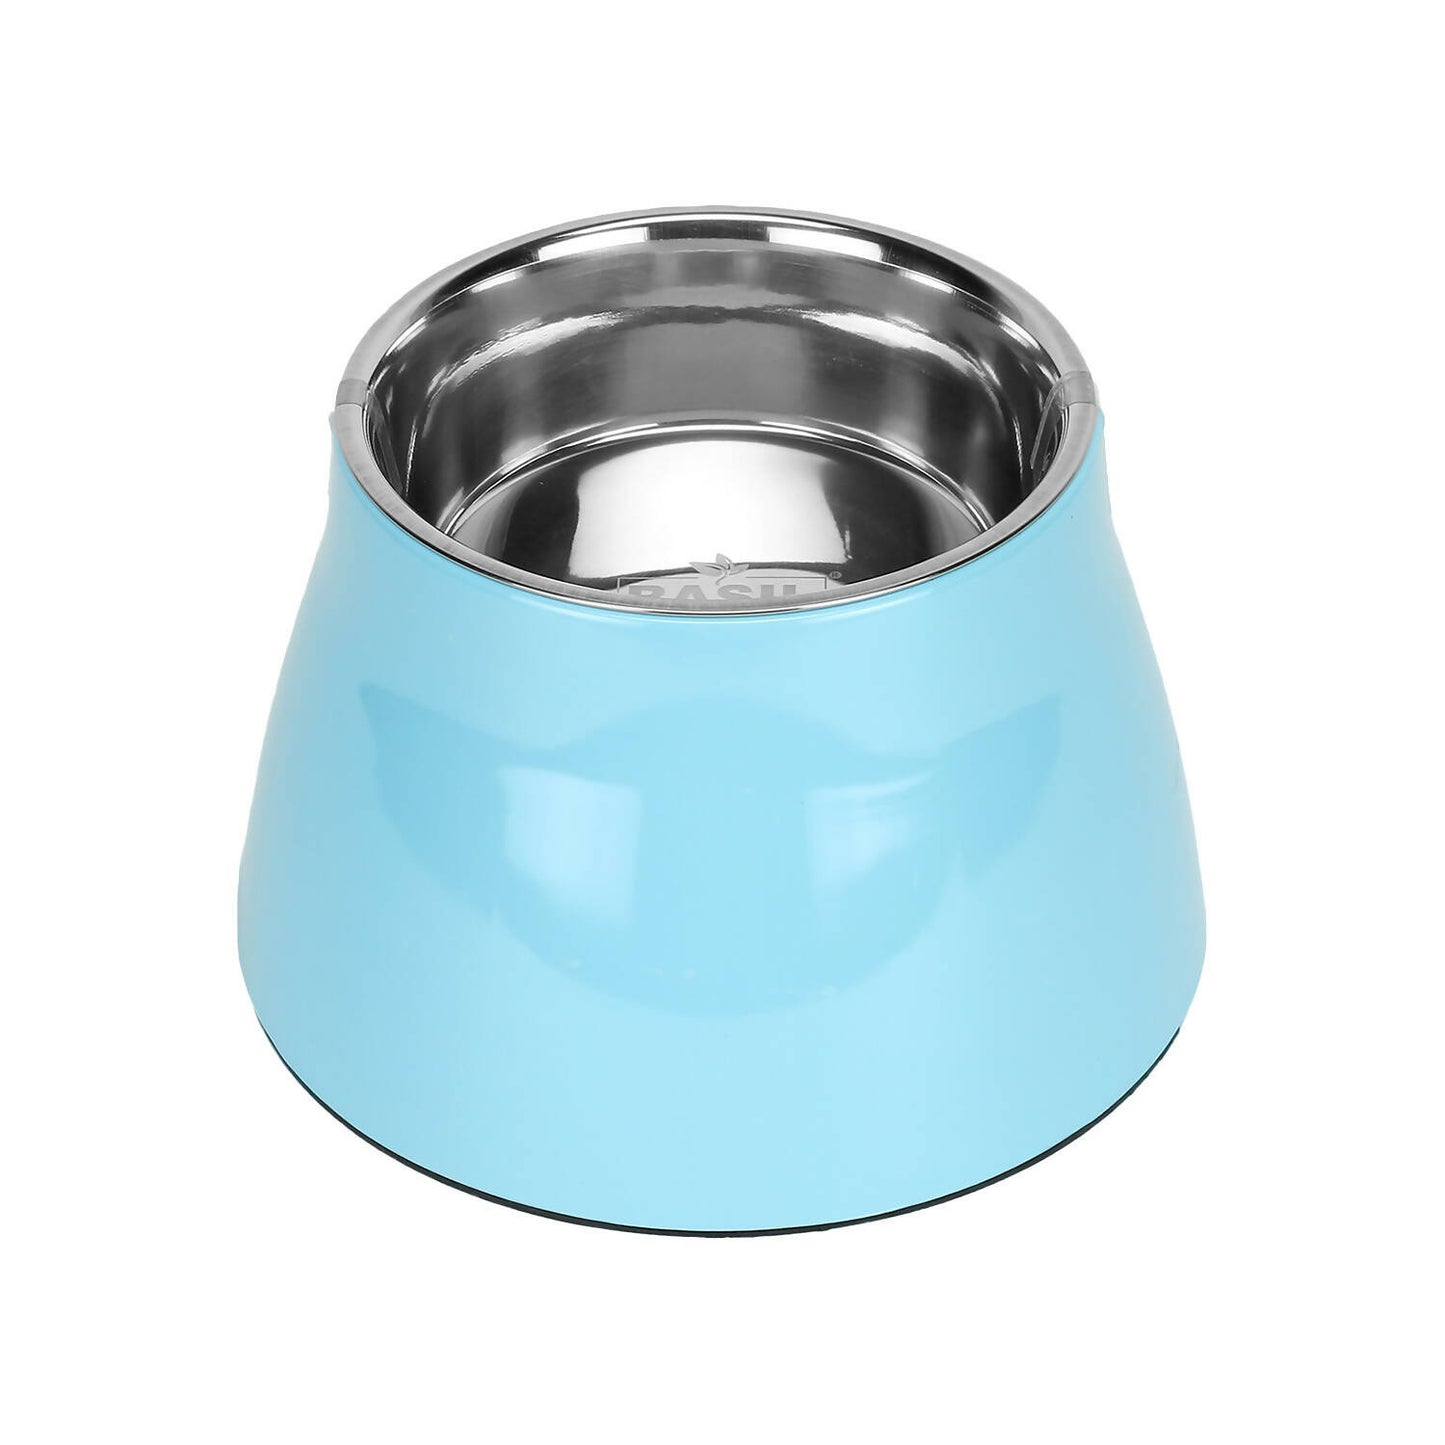 Basil - Elevated Bowl For Dogs